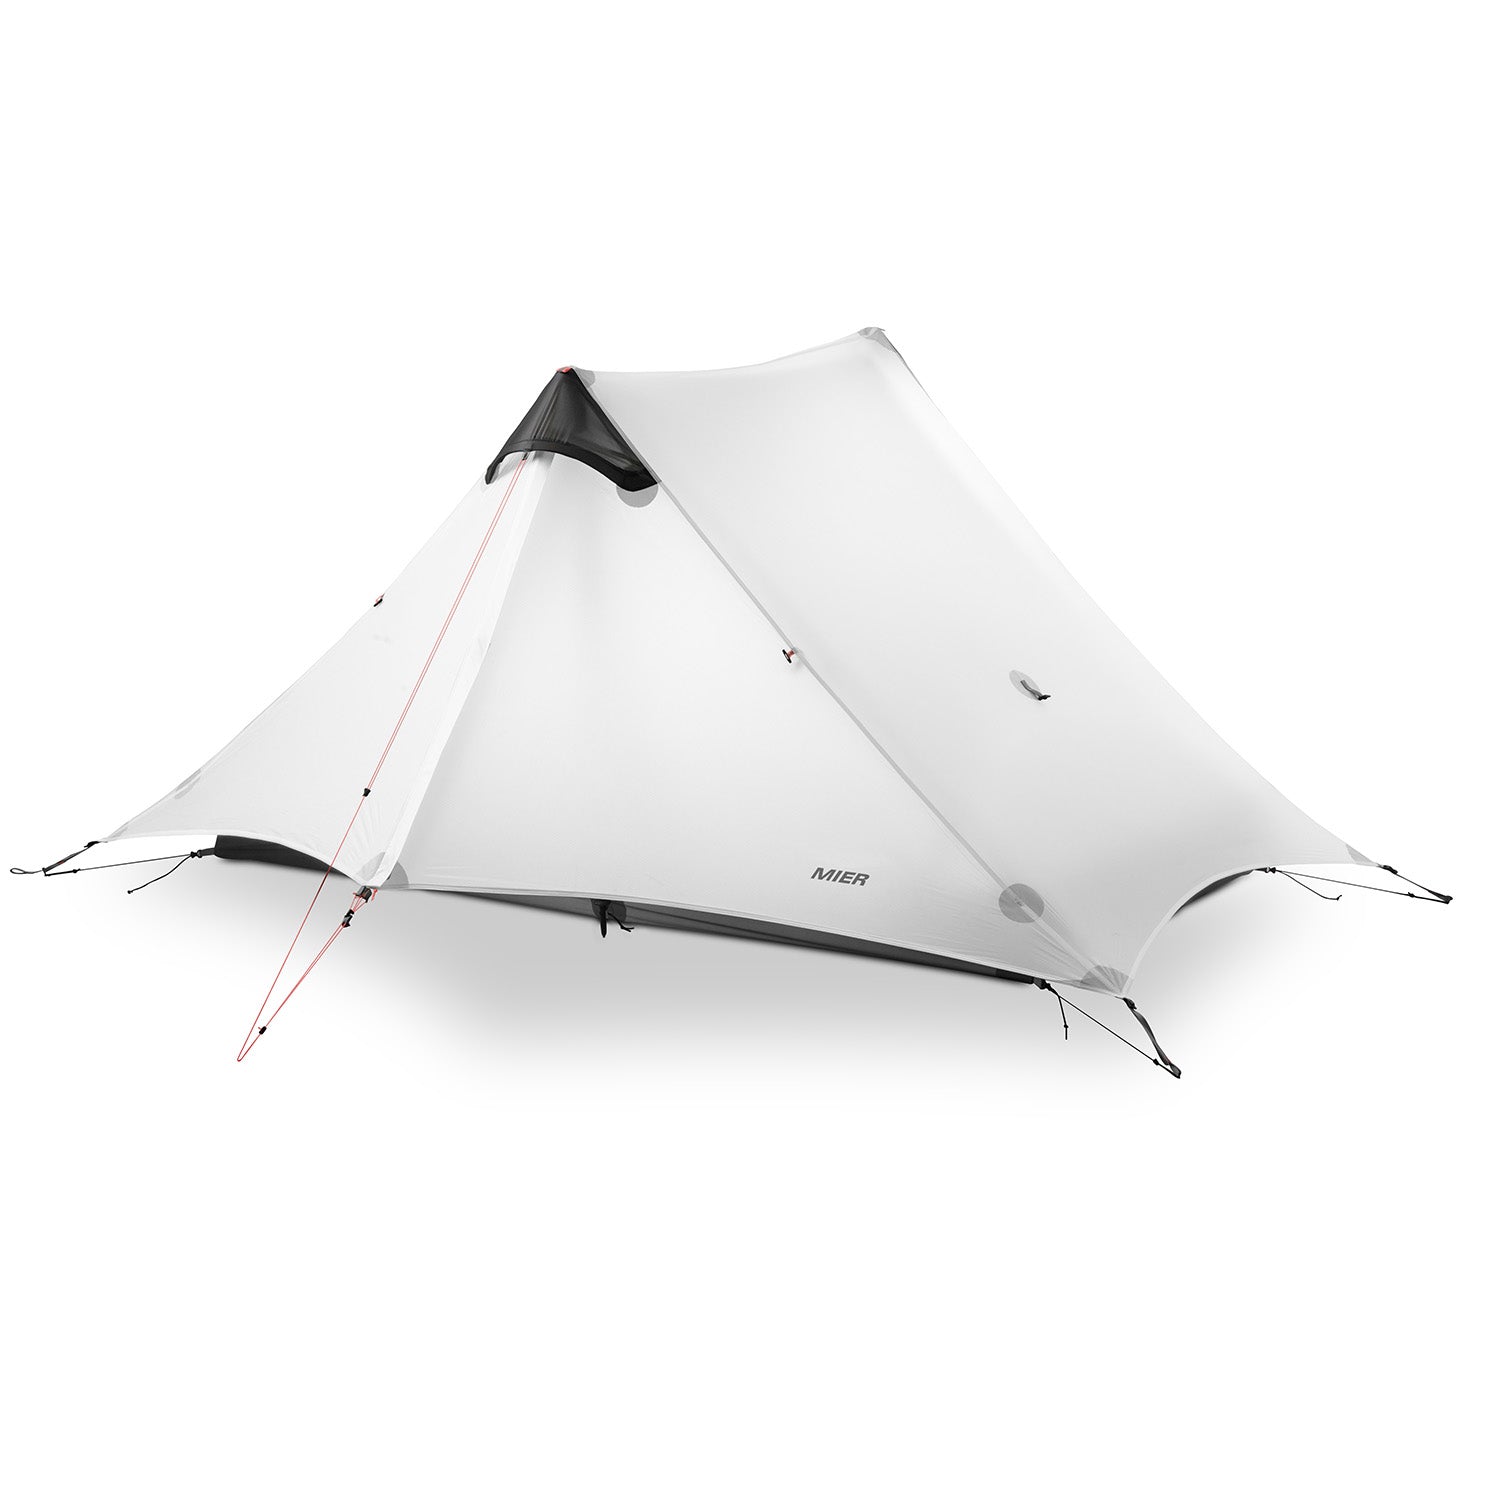 Lanshan 2 Person Ultralight Backpacking Tent Camping Pole Tent Lanshan Tent White / 2-Person MIER